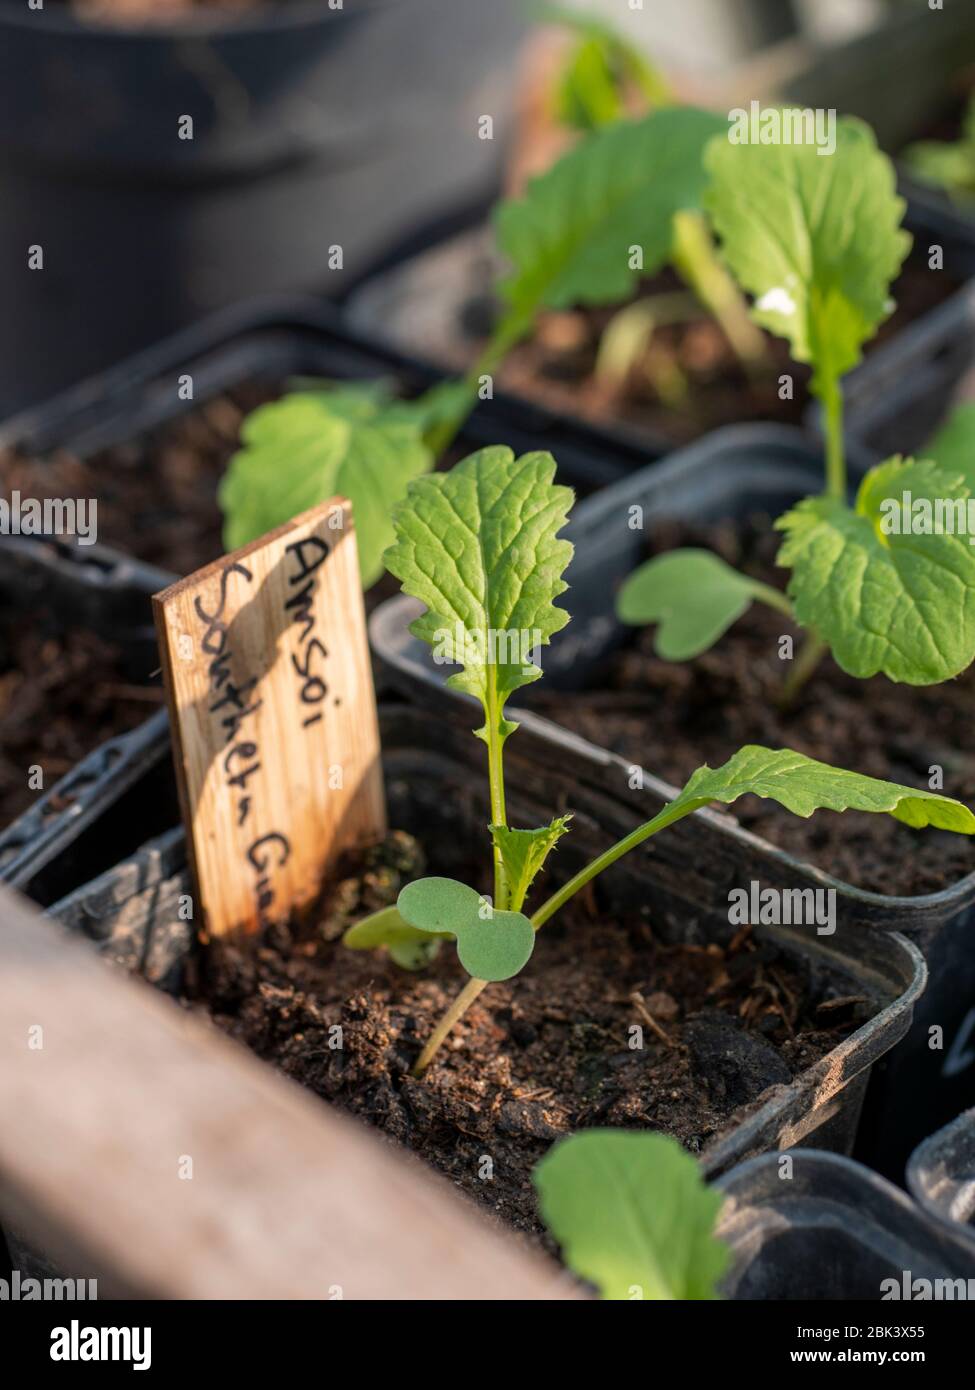 Amsoi 'Stouhern Giant curled' (Brassica juncea ssp. Juncea) plantules. Banque D'Images